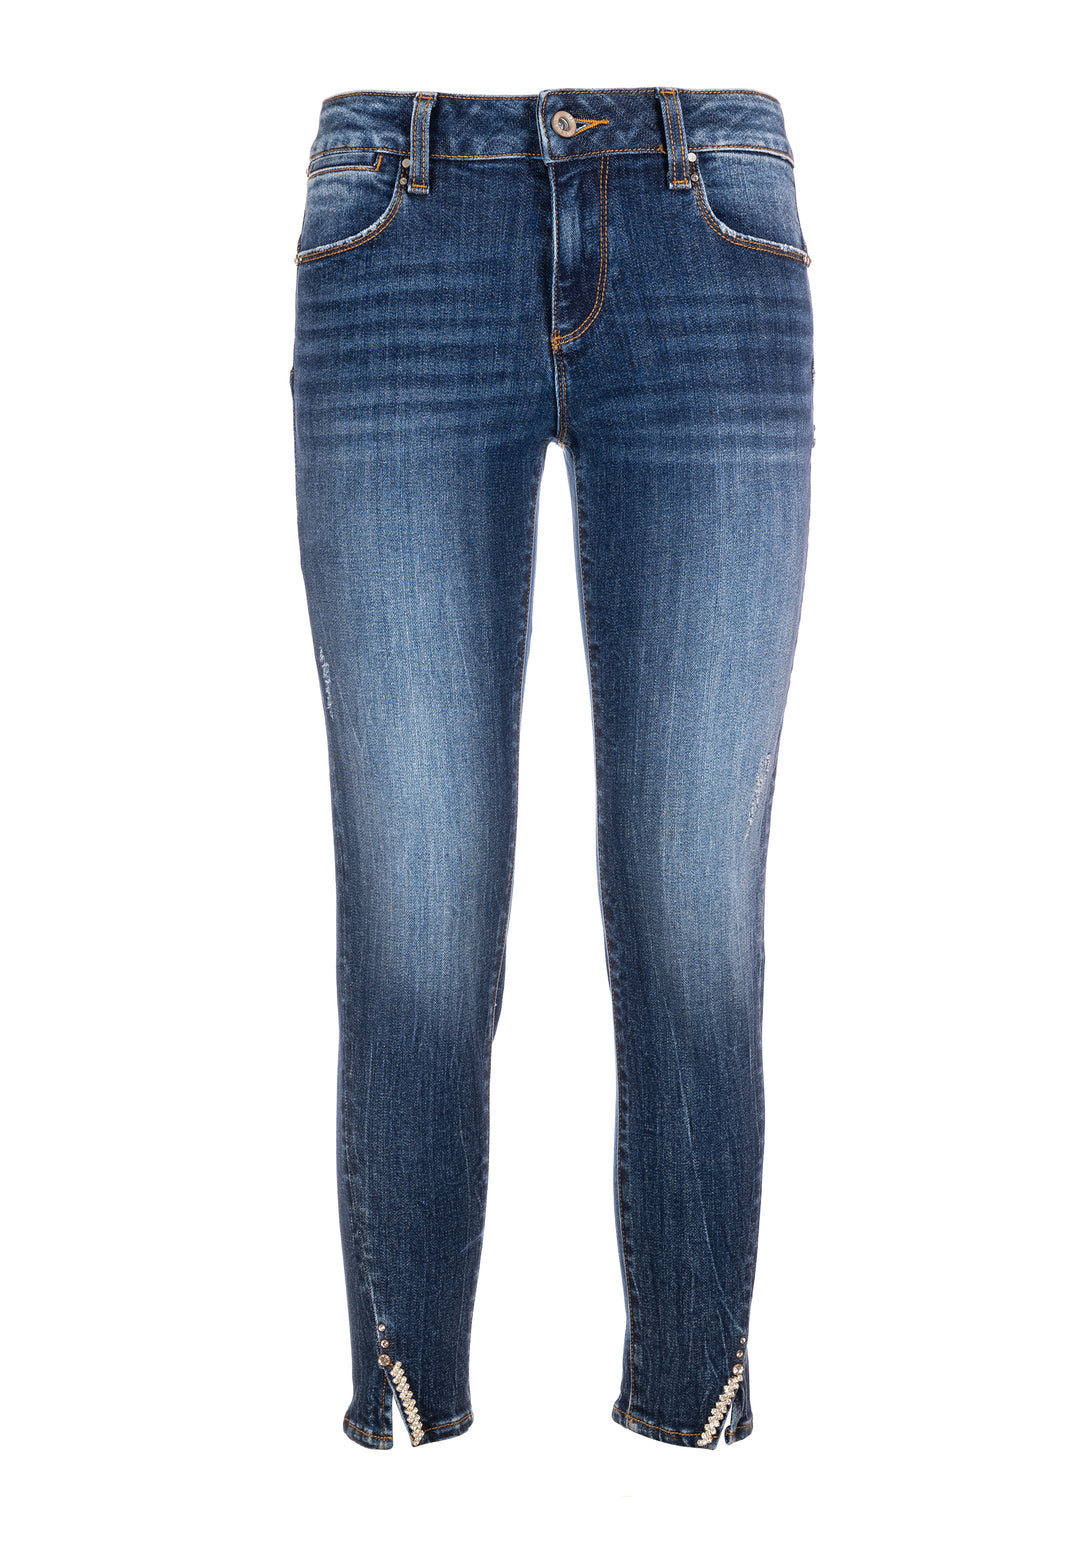 Jeans slim fit cropped with push up effect made in denim with middle wash